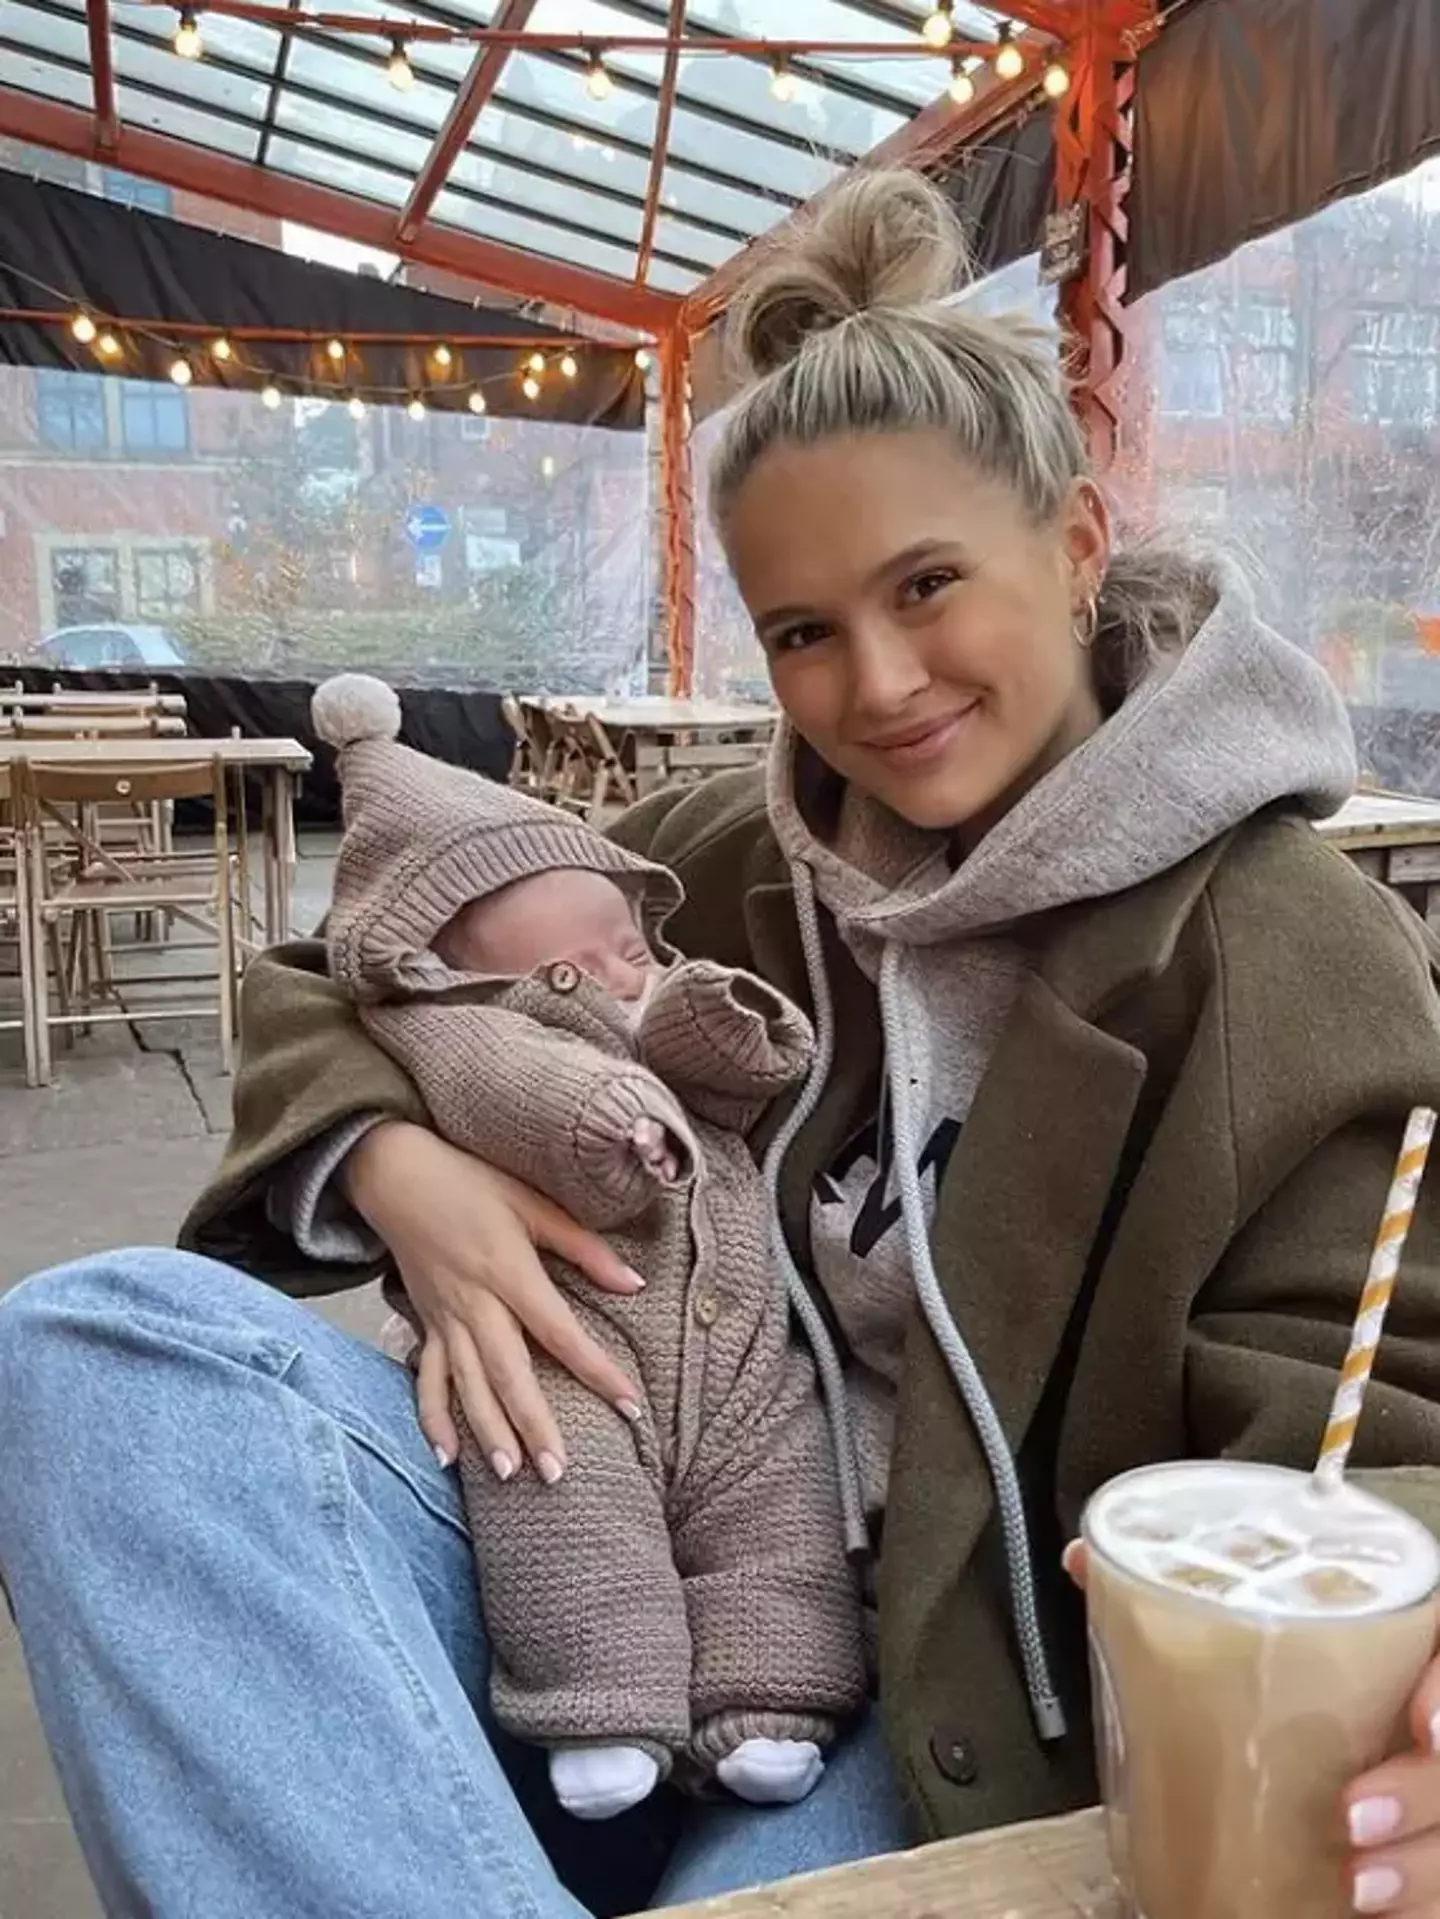 Molly-Mae admitted the first few weeks of motherhood have been 'super challenging'.